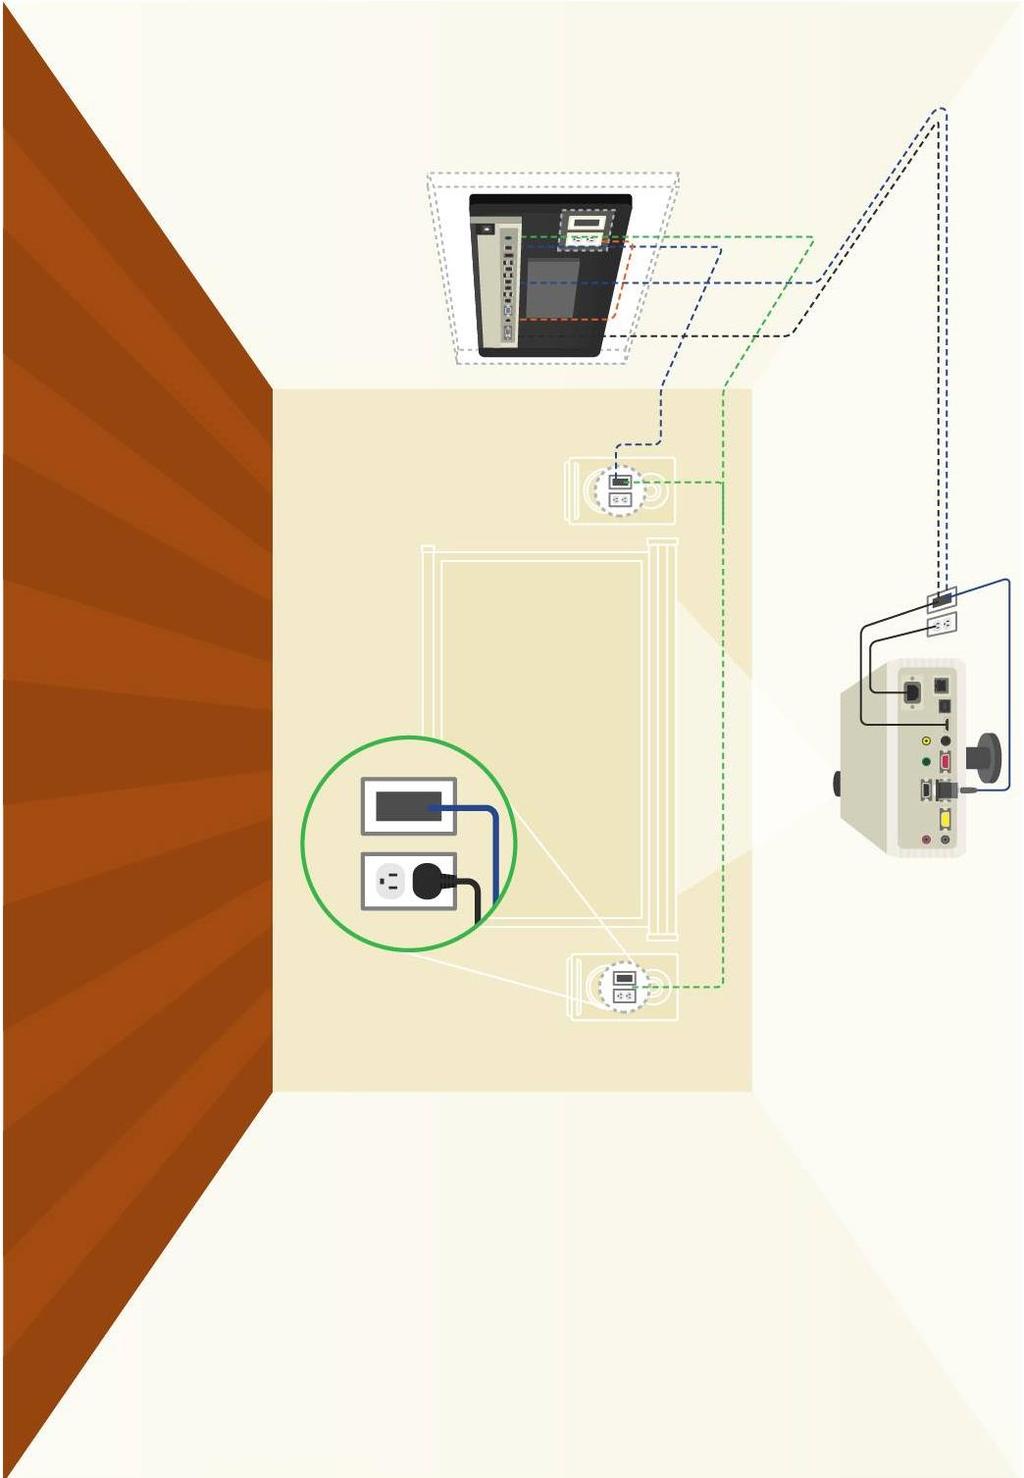 Fig. 4 Example of outlets and conduits (this and more examples can be found in full size on page 14 and onward) - Outlet and conduit behind the OnDemand kiosk (illustrated as mounted